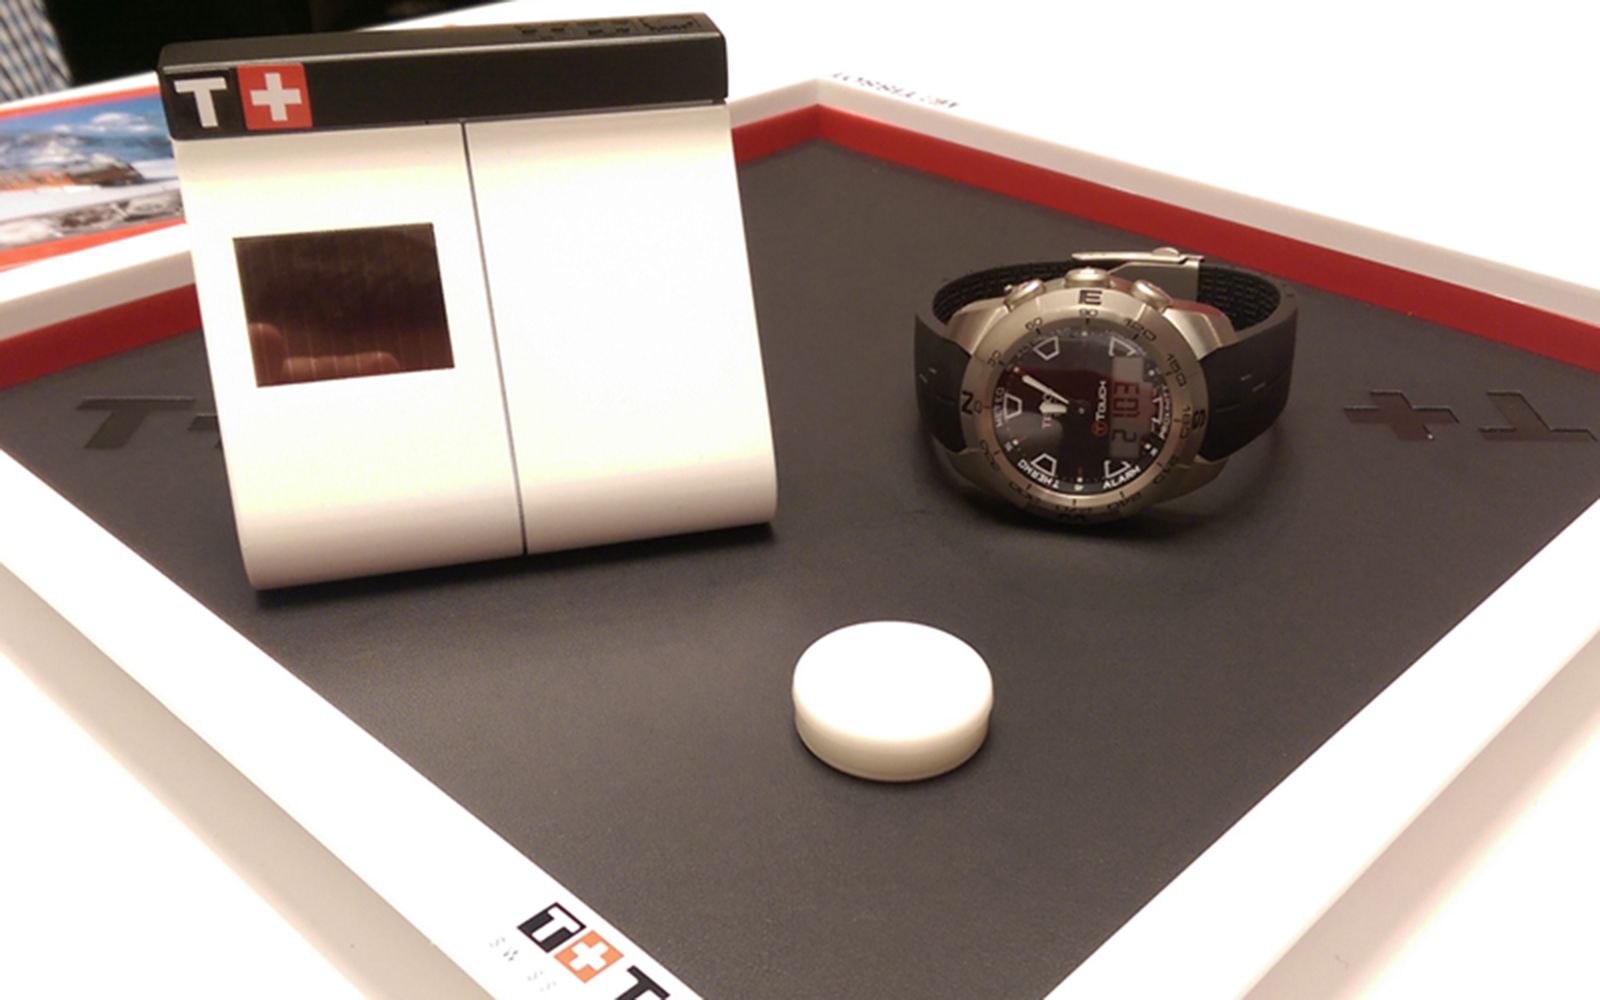 tissot unveils smartwatch that uses clock hands to point you to lost keys image 1